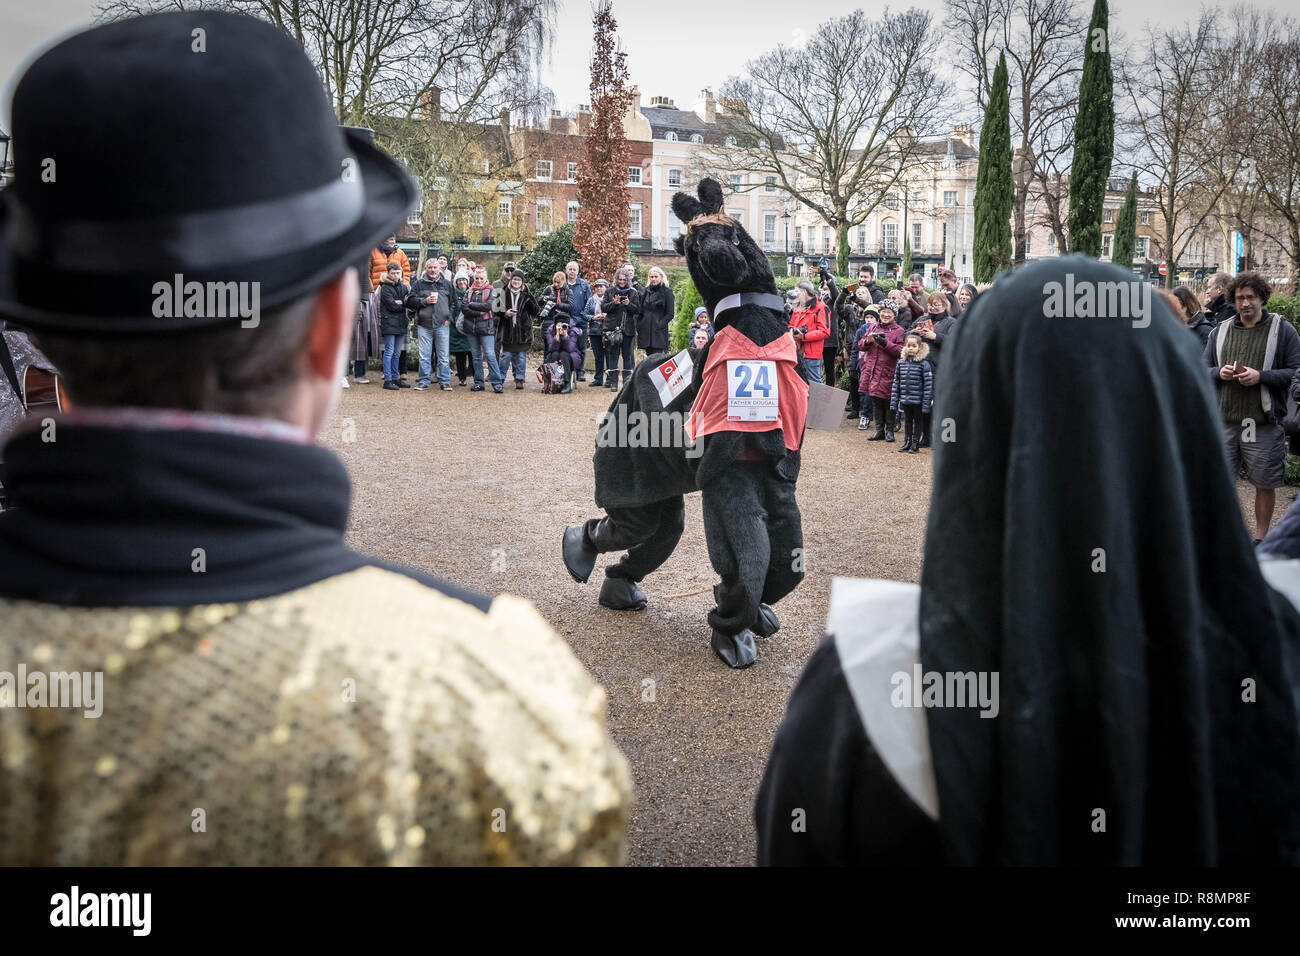 London, UK. 16th Dec 2018. Annual Christmas London Pantomime Horse Race in Greenwich. Credit: Guy Corbishley/Alamy Live News Stock Photo